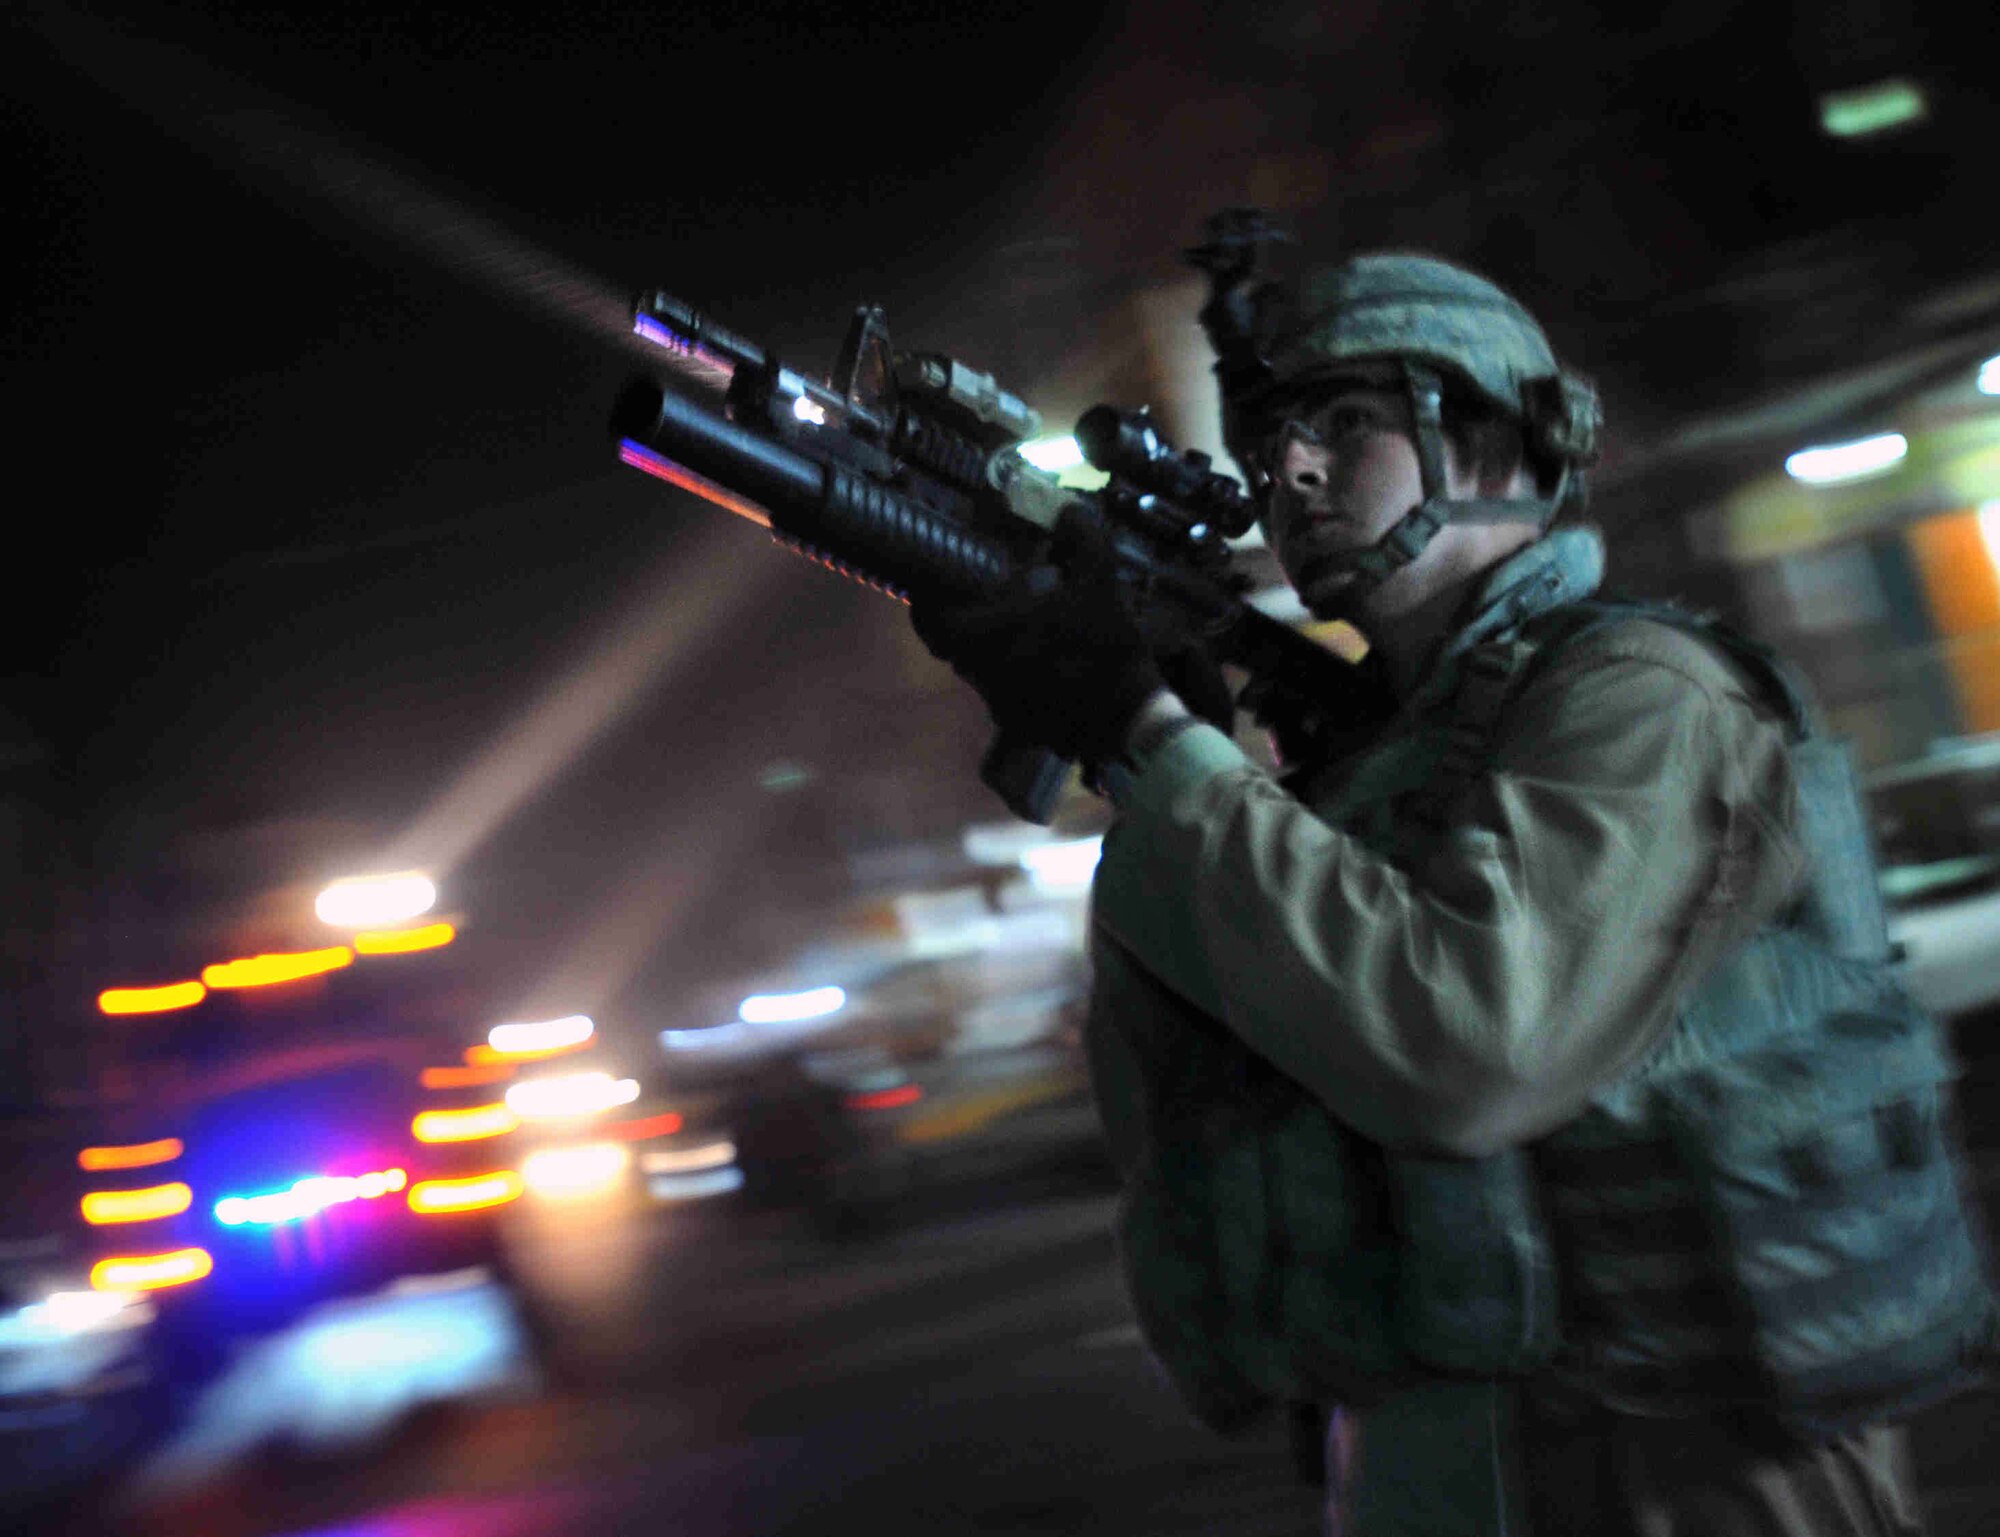 U.S. Air Force Sgt. Jarrett Cox of Lilburn Ga., scans his perimeter during a joint walking patrol with Iraqi National Policemen in the Sadiah district of southern Baghdad, Iraq, Dec. 17, 2008. (U.S. Navy Photo by Petty Officer 2nd Class Todd Frantom/Released)
